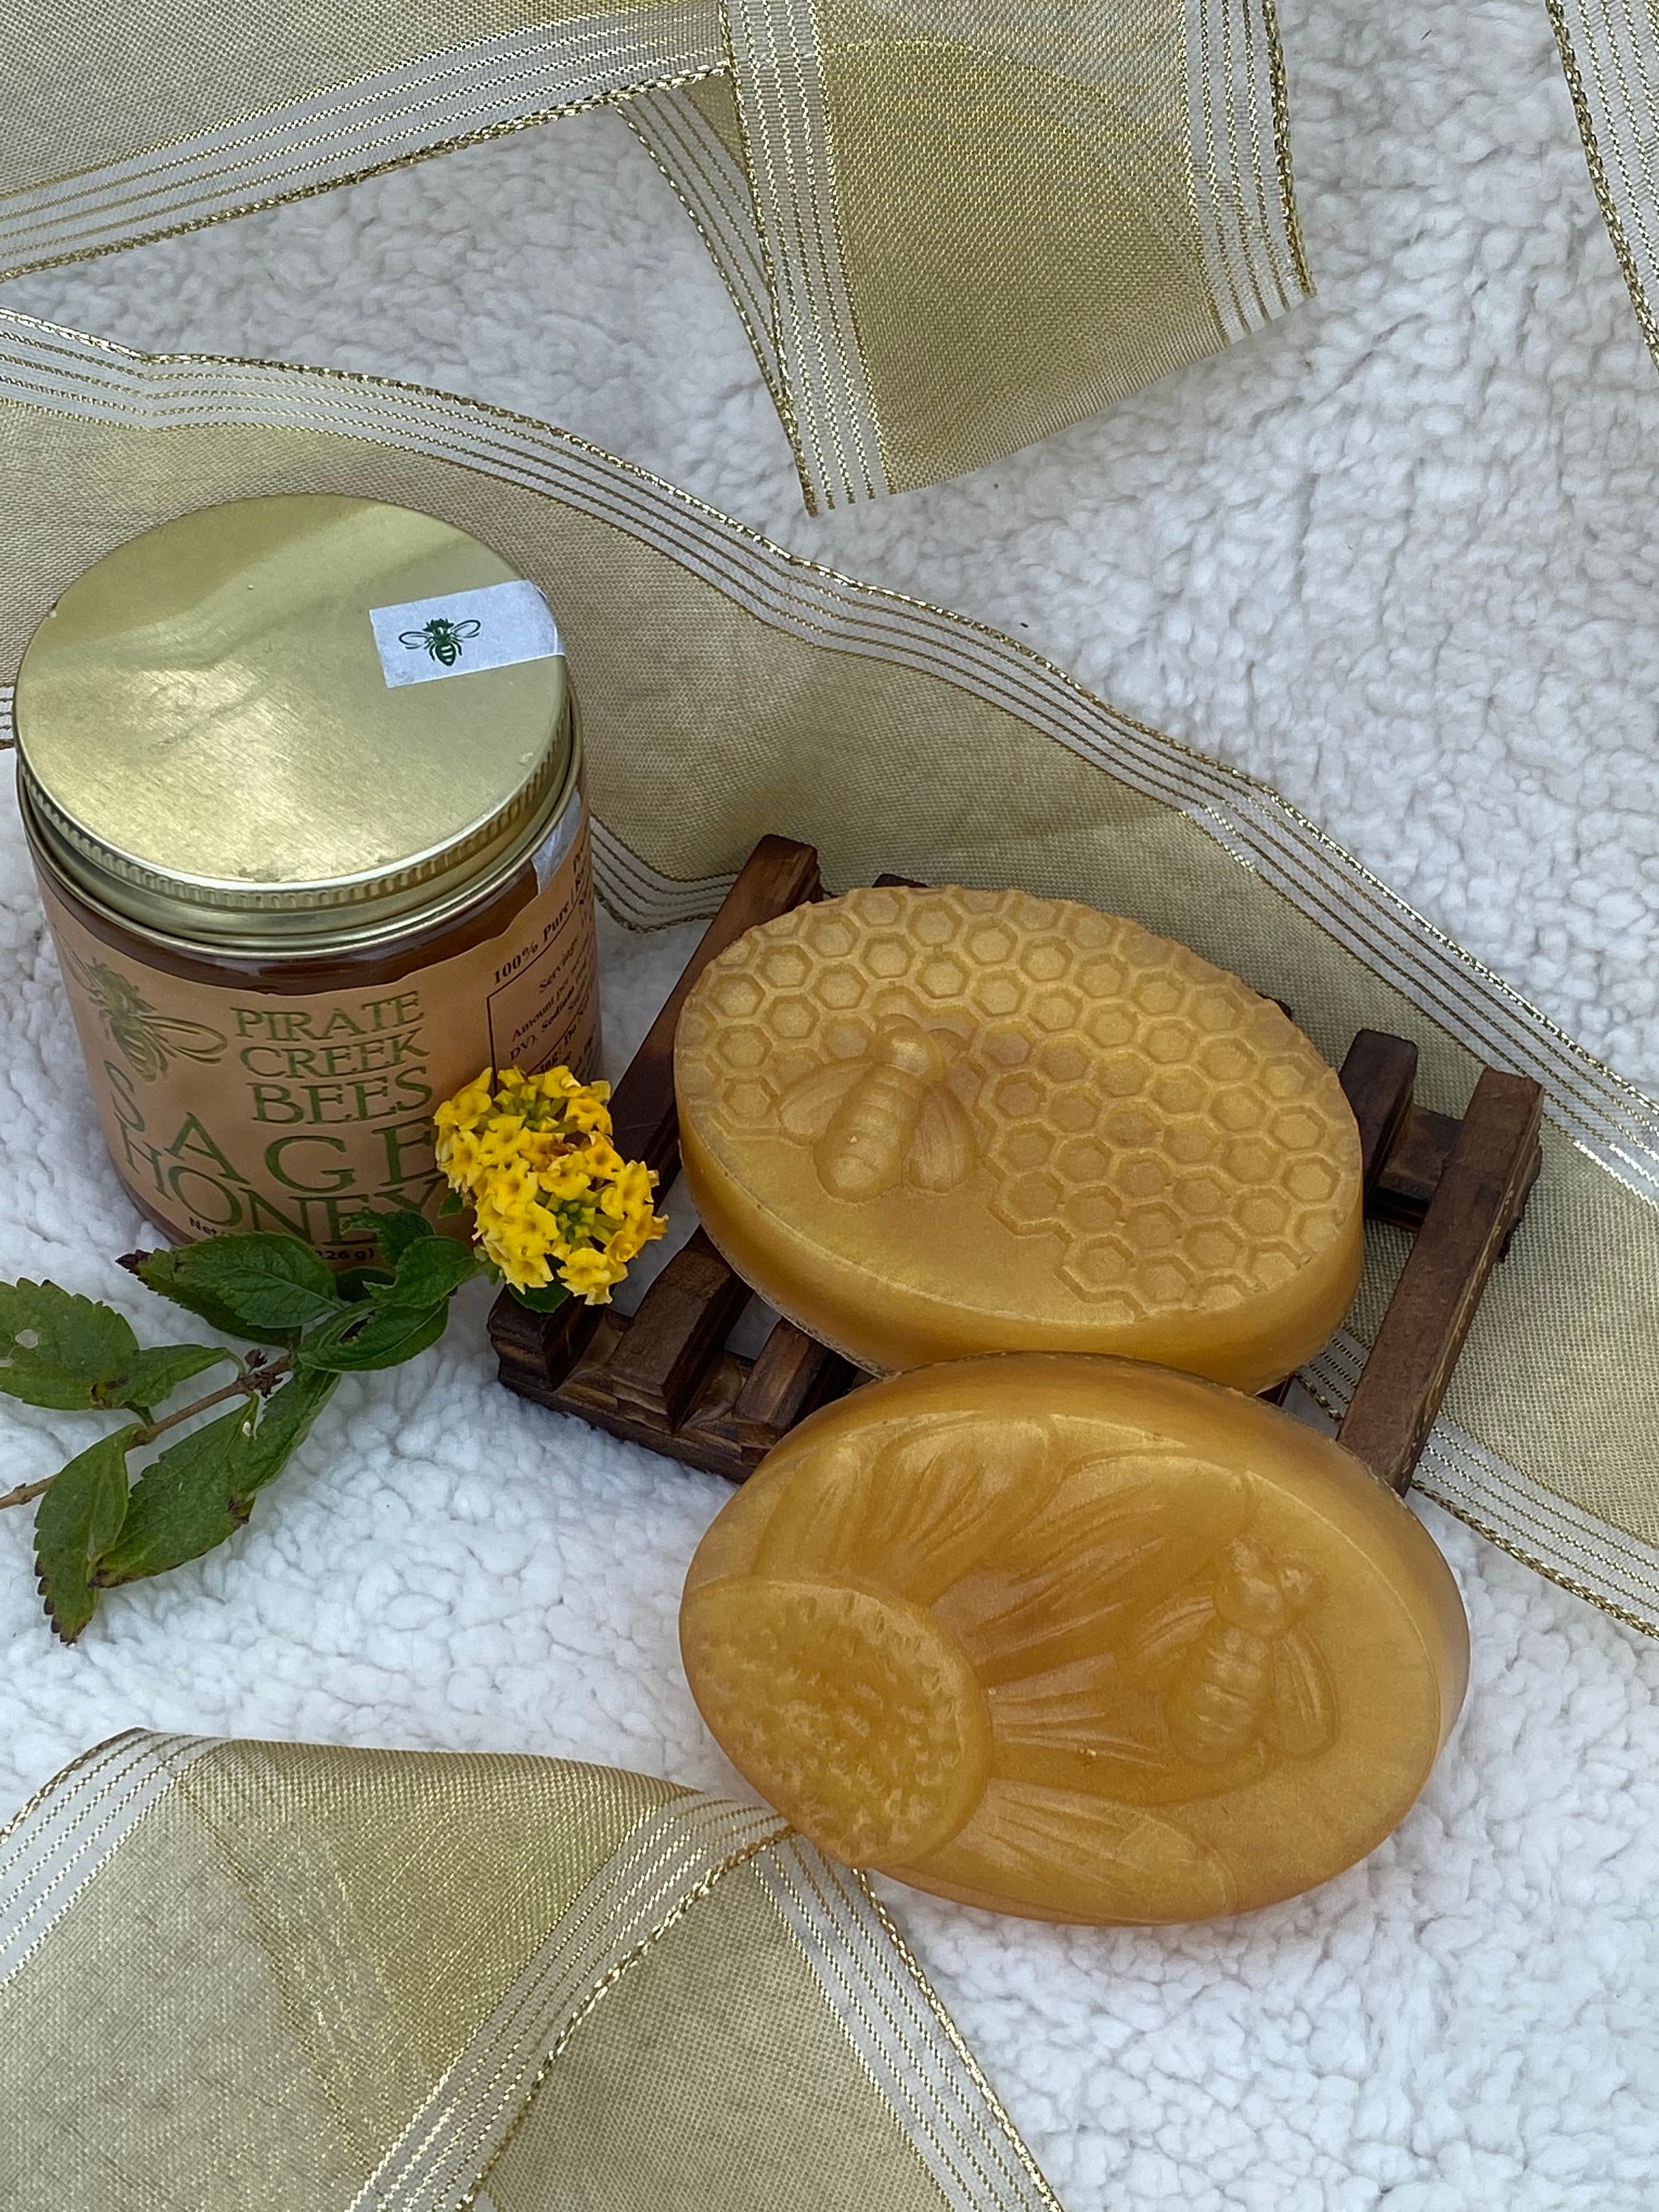 Amish Farms Natural Soap Bar with Exfoliating Sage, Lavender Scent, Made in USA - Homemade, Vegan Face & Body Soap Scrub for Sensitive Skin - No